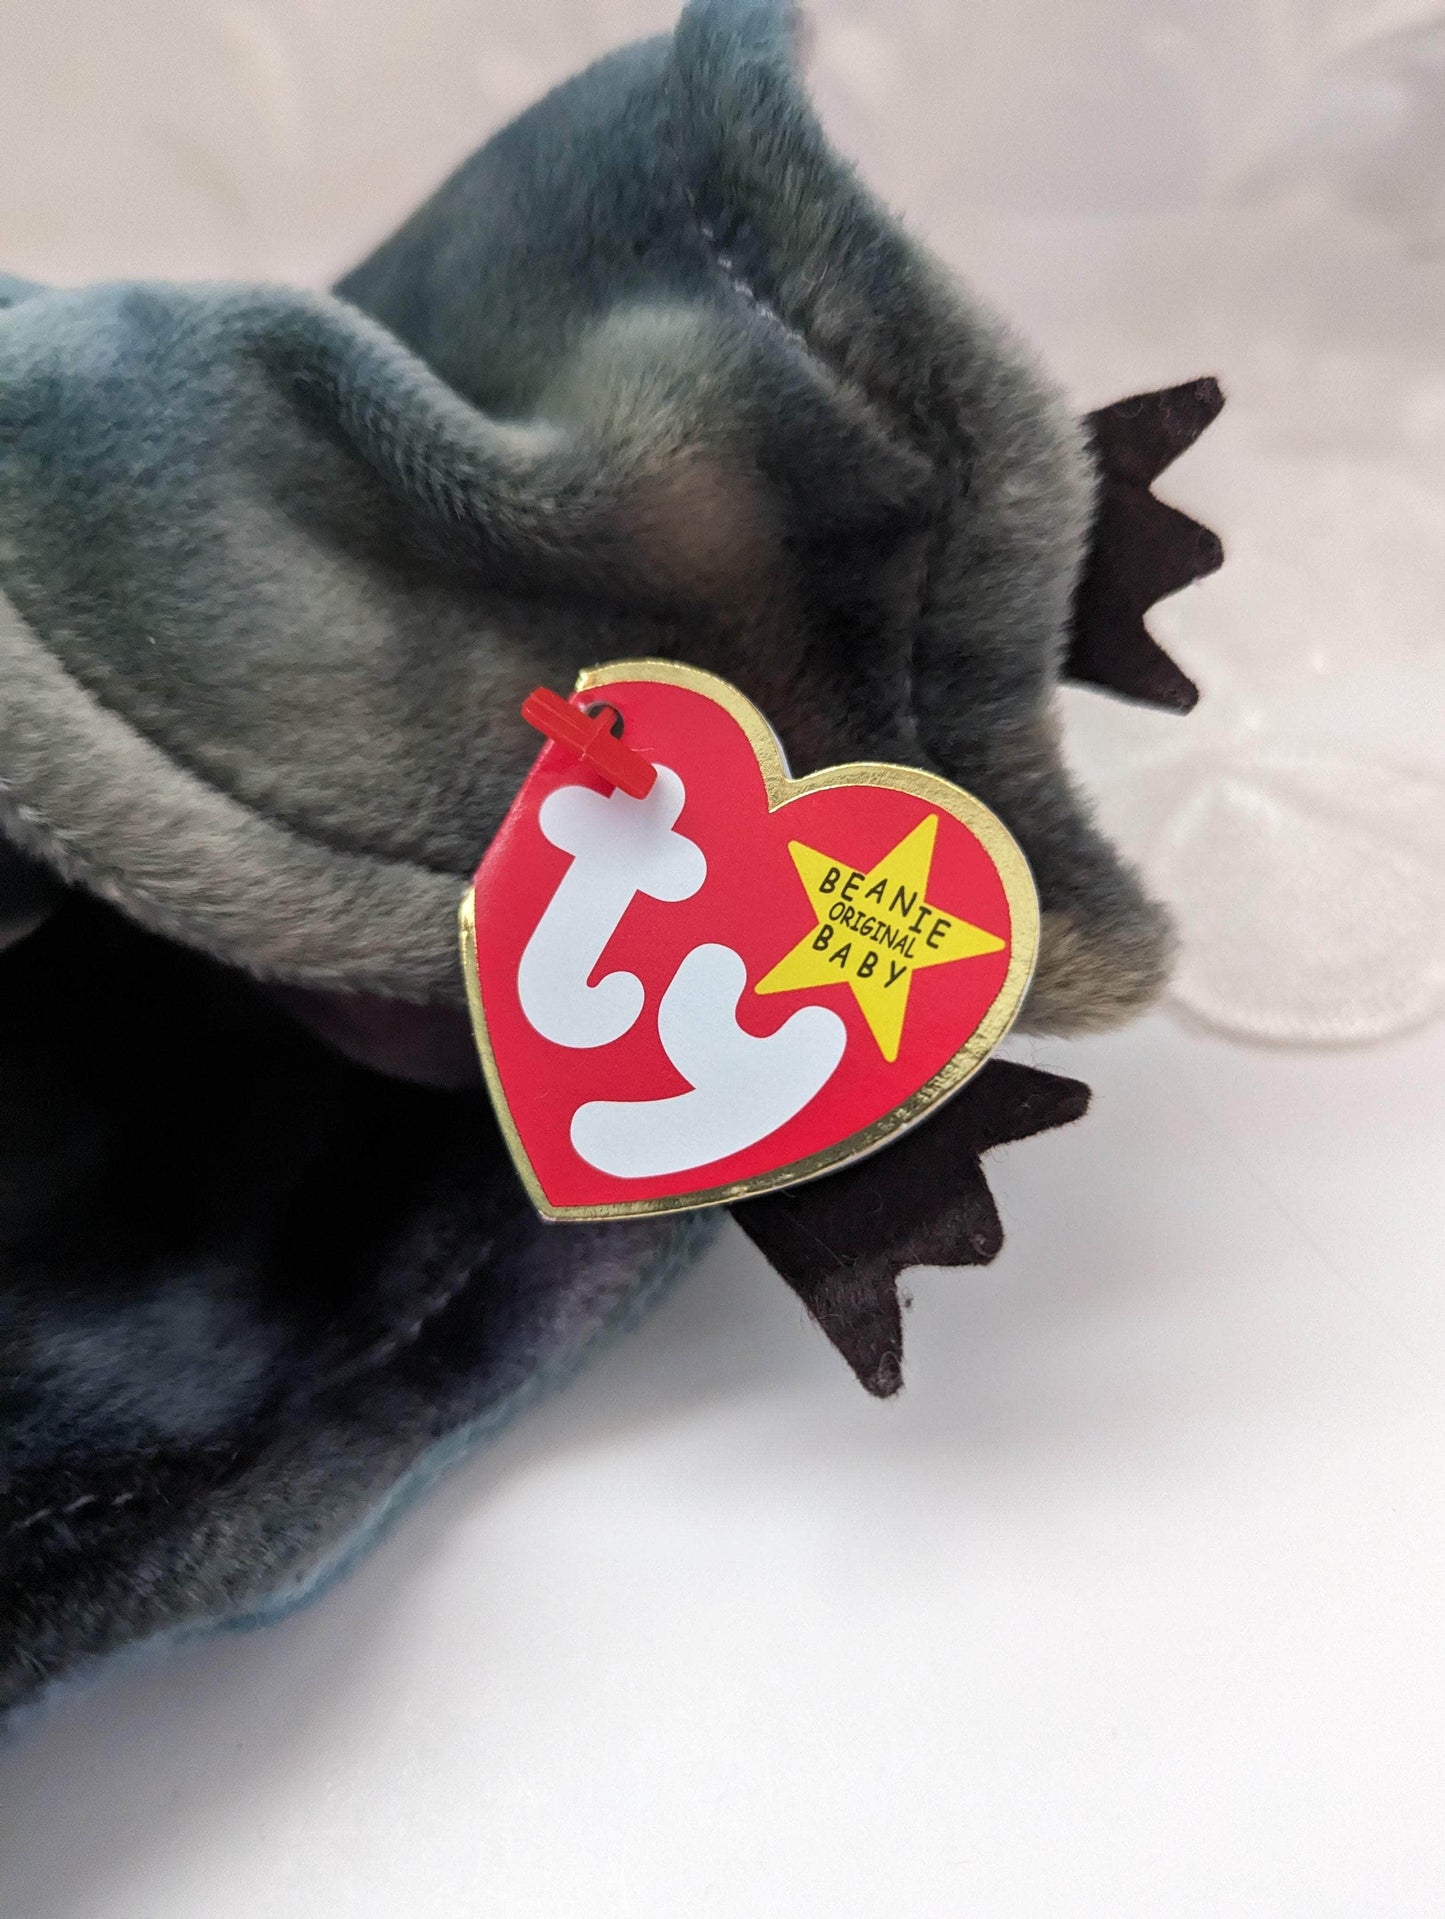 Ty Beanie Baby - Batty The Multi-colored Bat (5in) - Vintage Beanies Canada